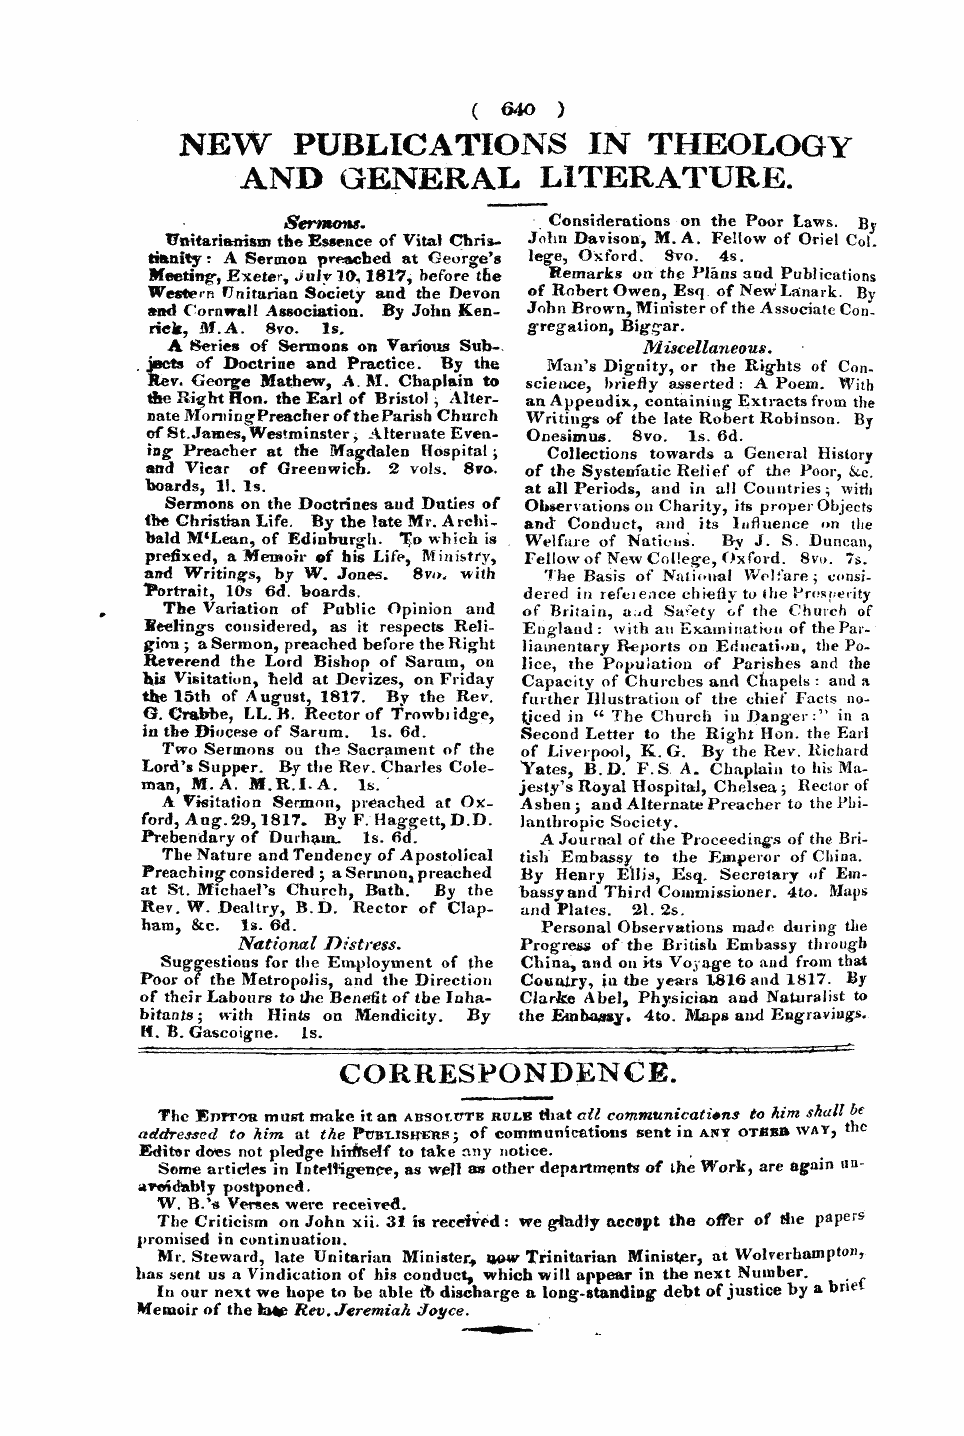 Monthly Repository (1806-1838) and Unitarian Chronicle (1832-1833): F Y, 1st edition - 1 ¦ 1 — ¦ .'.. '' * ' '" 7 "1 . * ¦' . ' ' ' ** ' ¦* I. &Lt;. *^ ' ^ Rf . . "T * Correspondence.